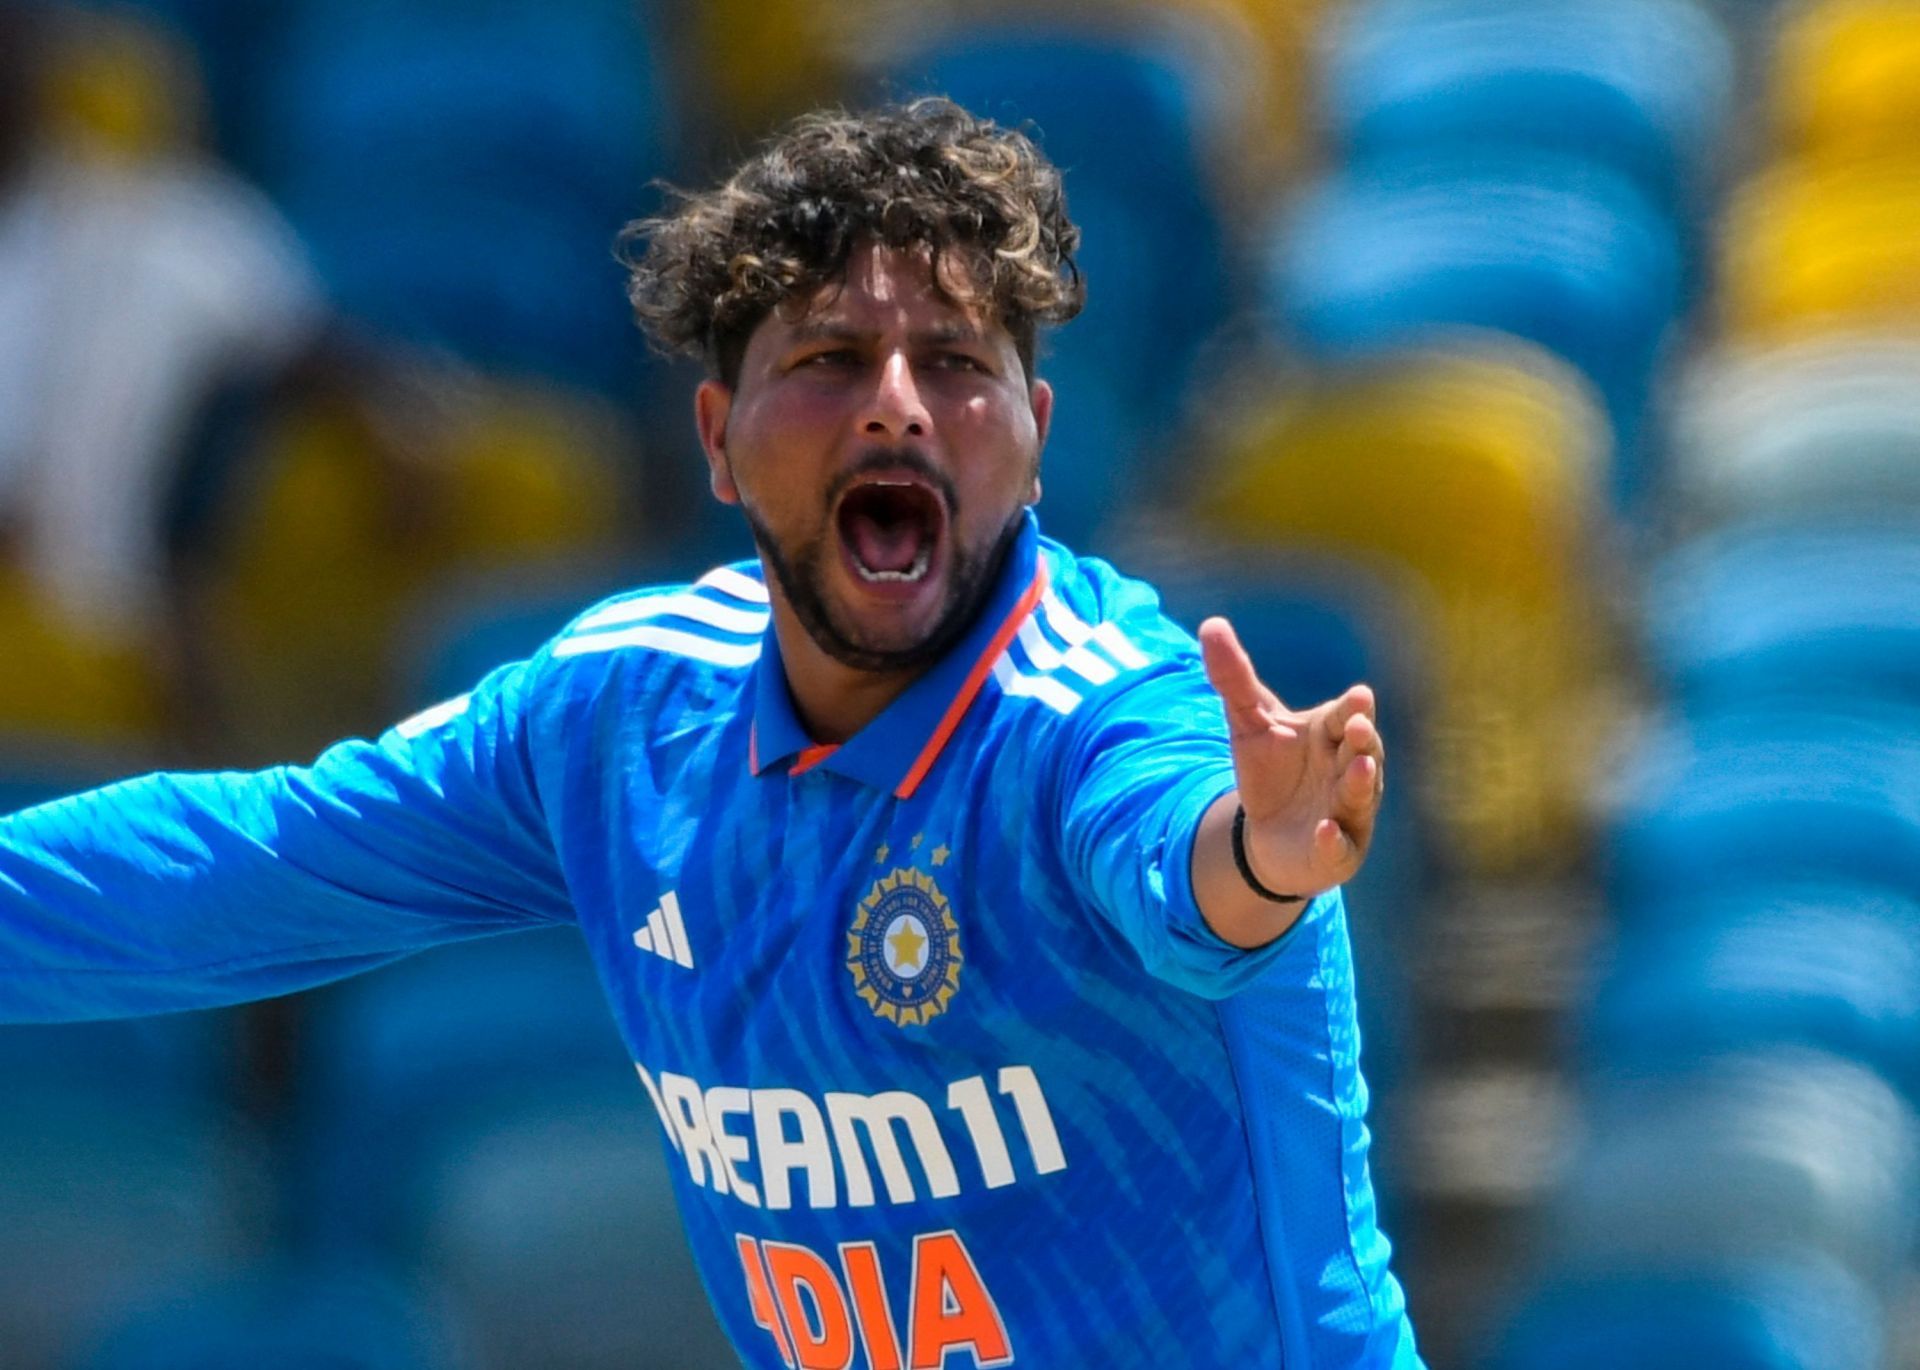 Kuldeep Yadav mesmerized the West Indies lower-order batters with his bag of tricks. [P/C: BCCI]